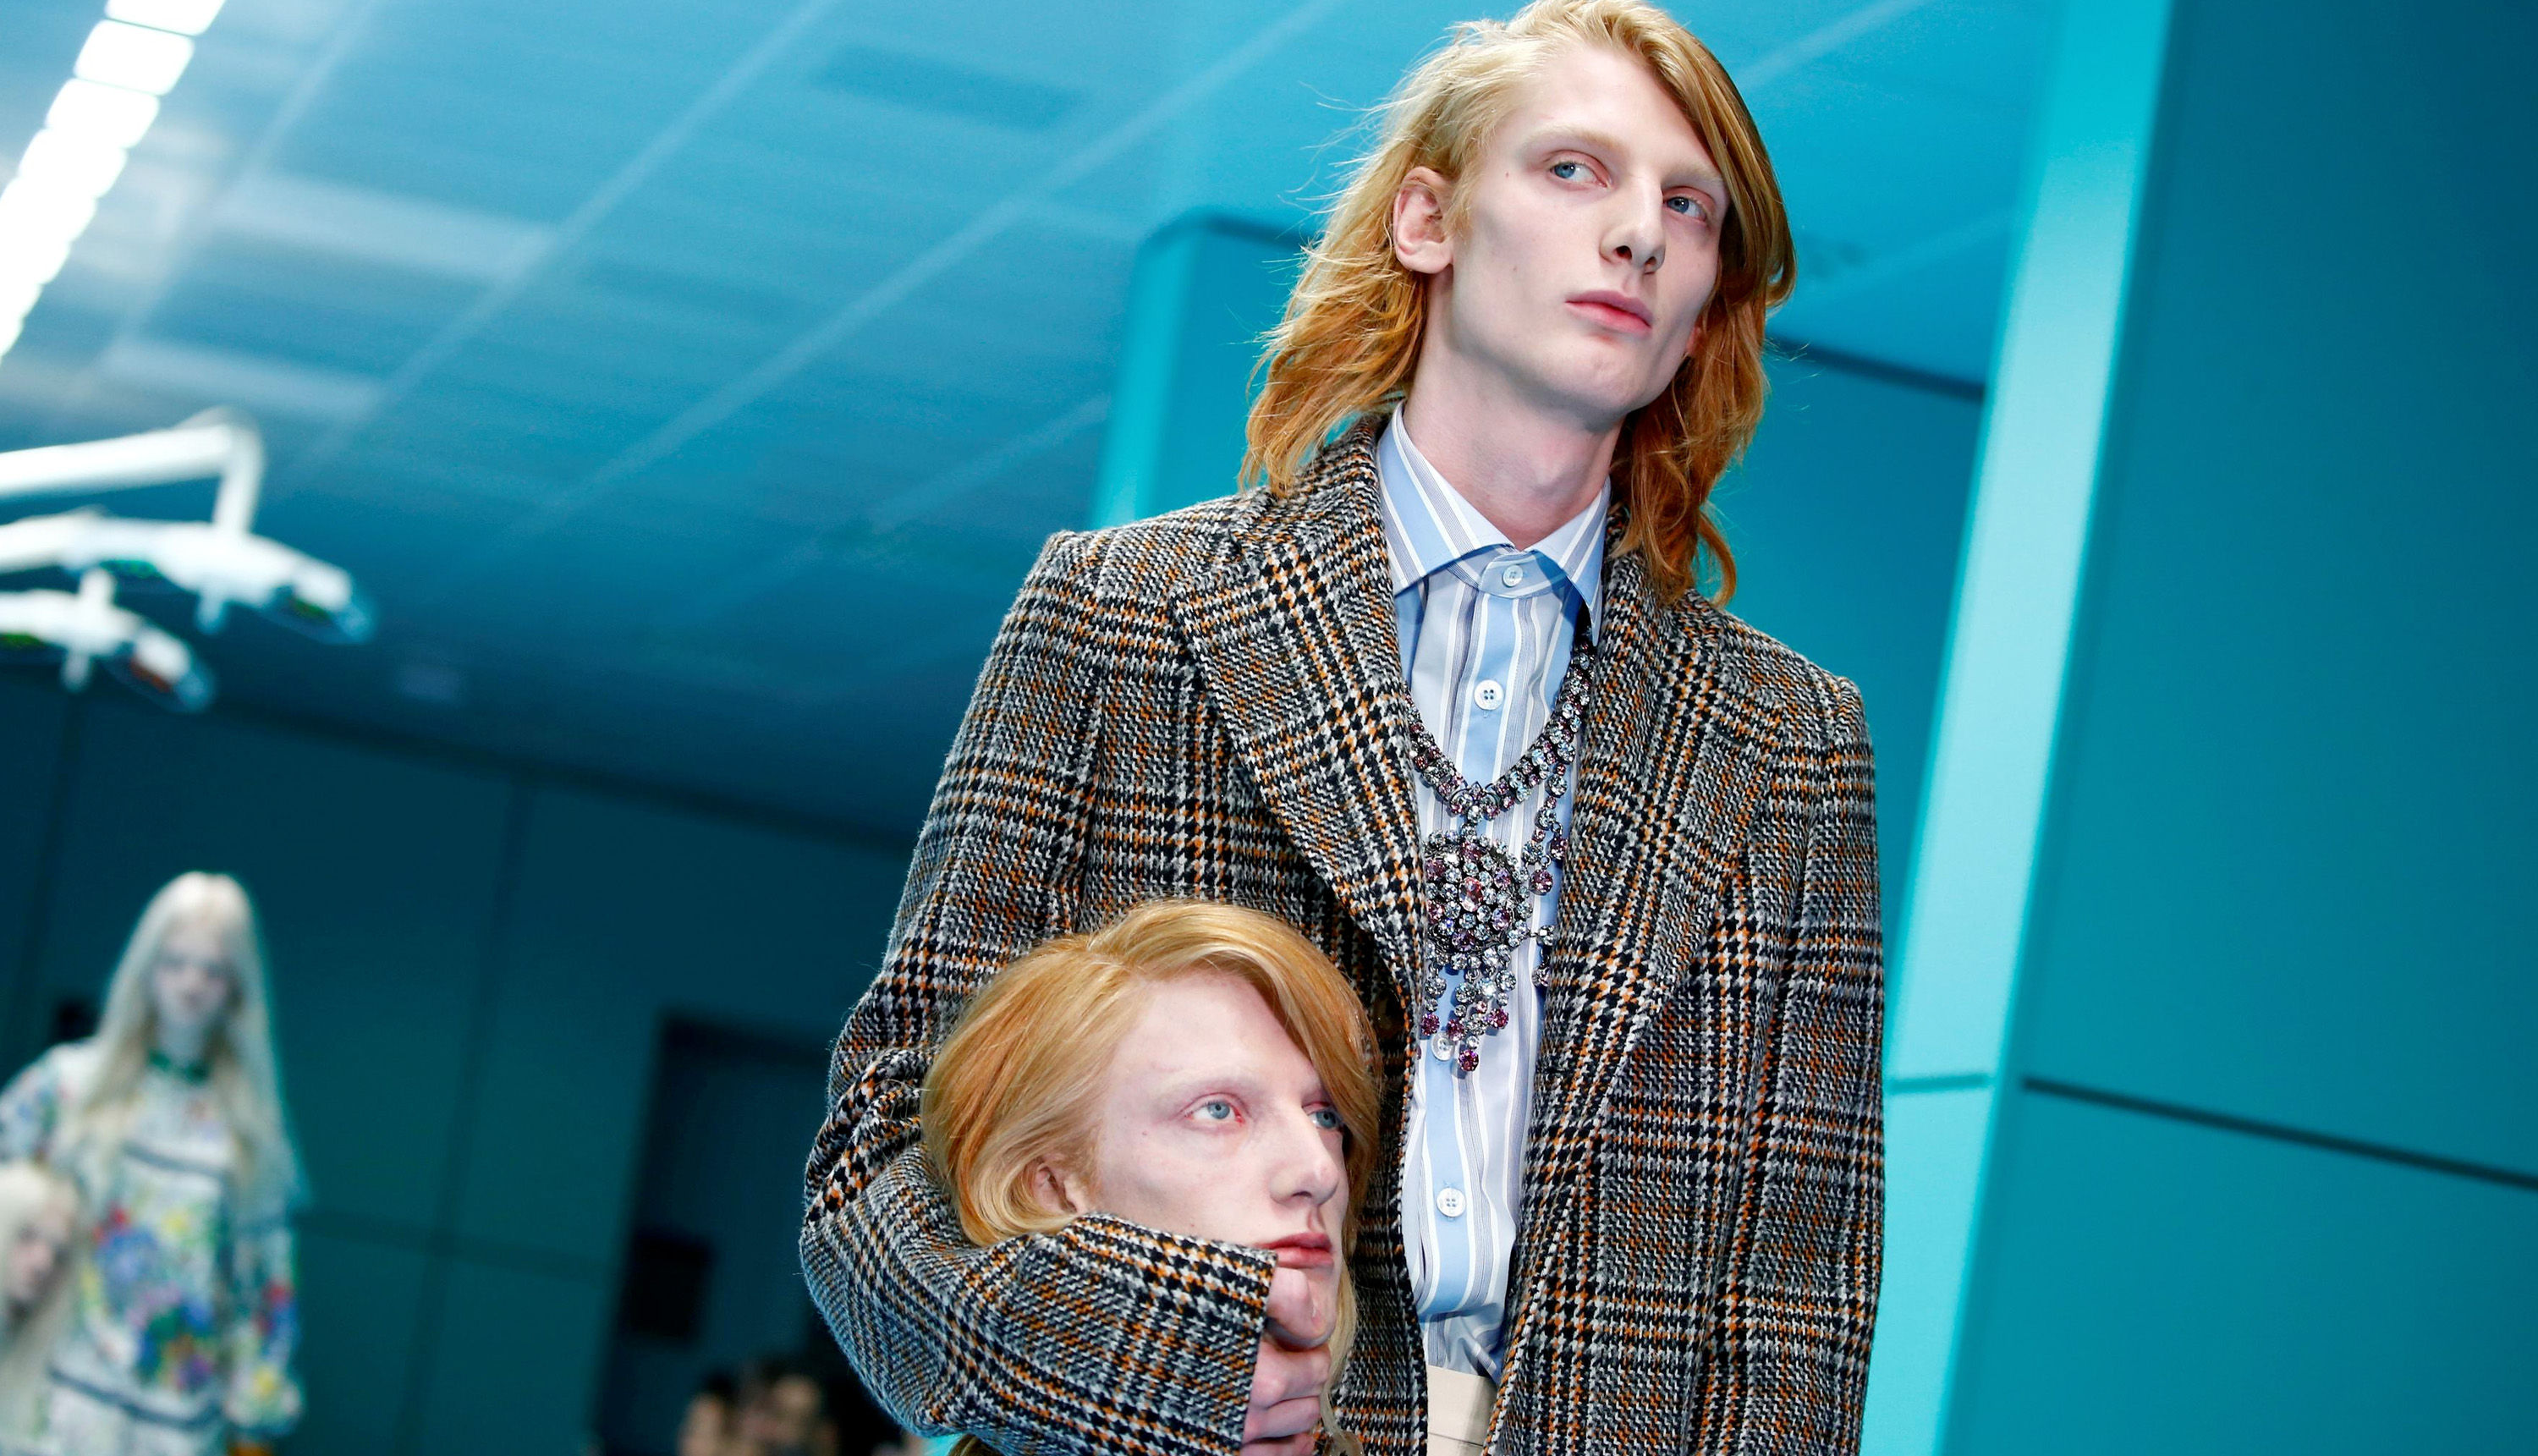 Gucci’s hot new severed-head accessory is taking over the Internet